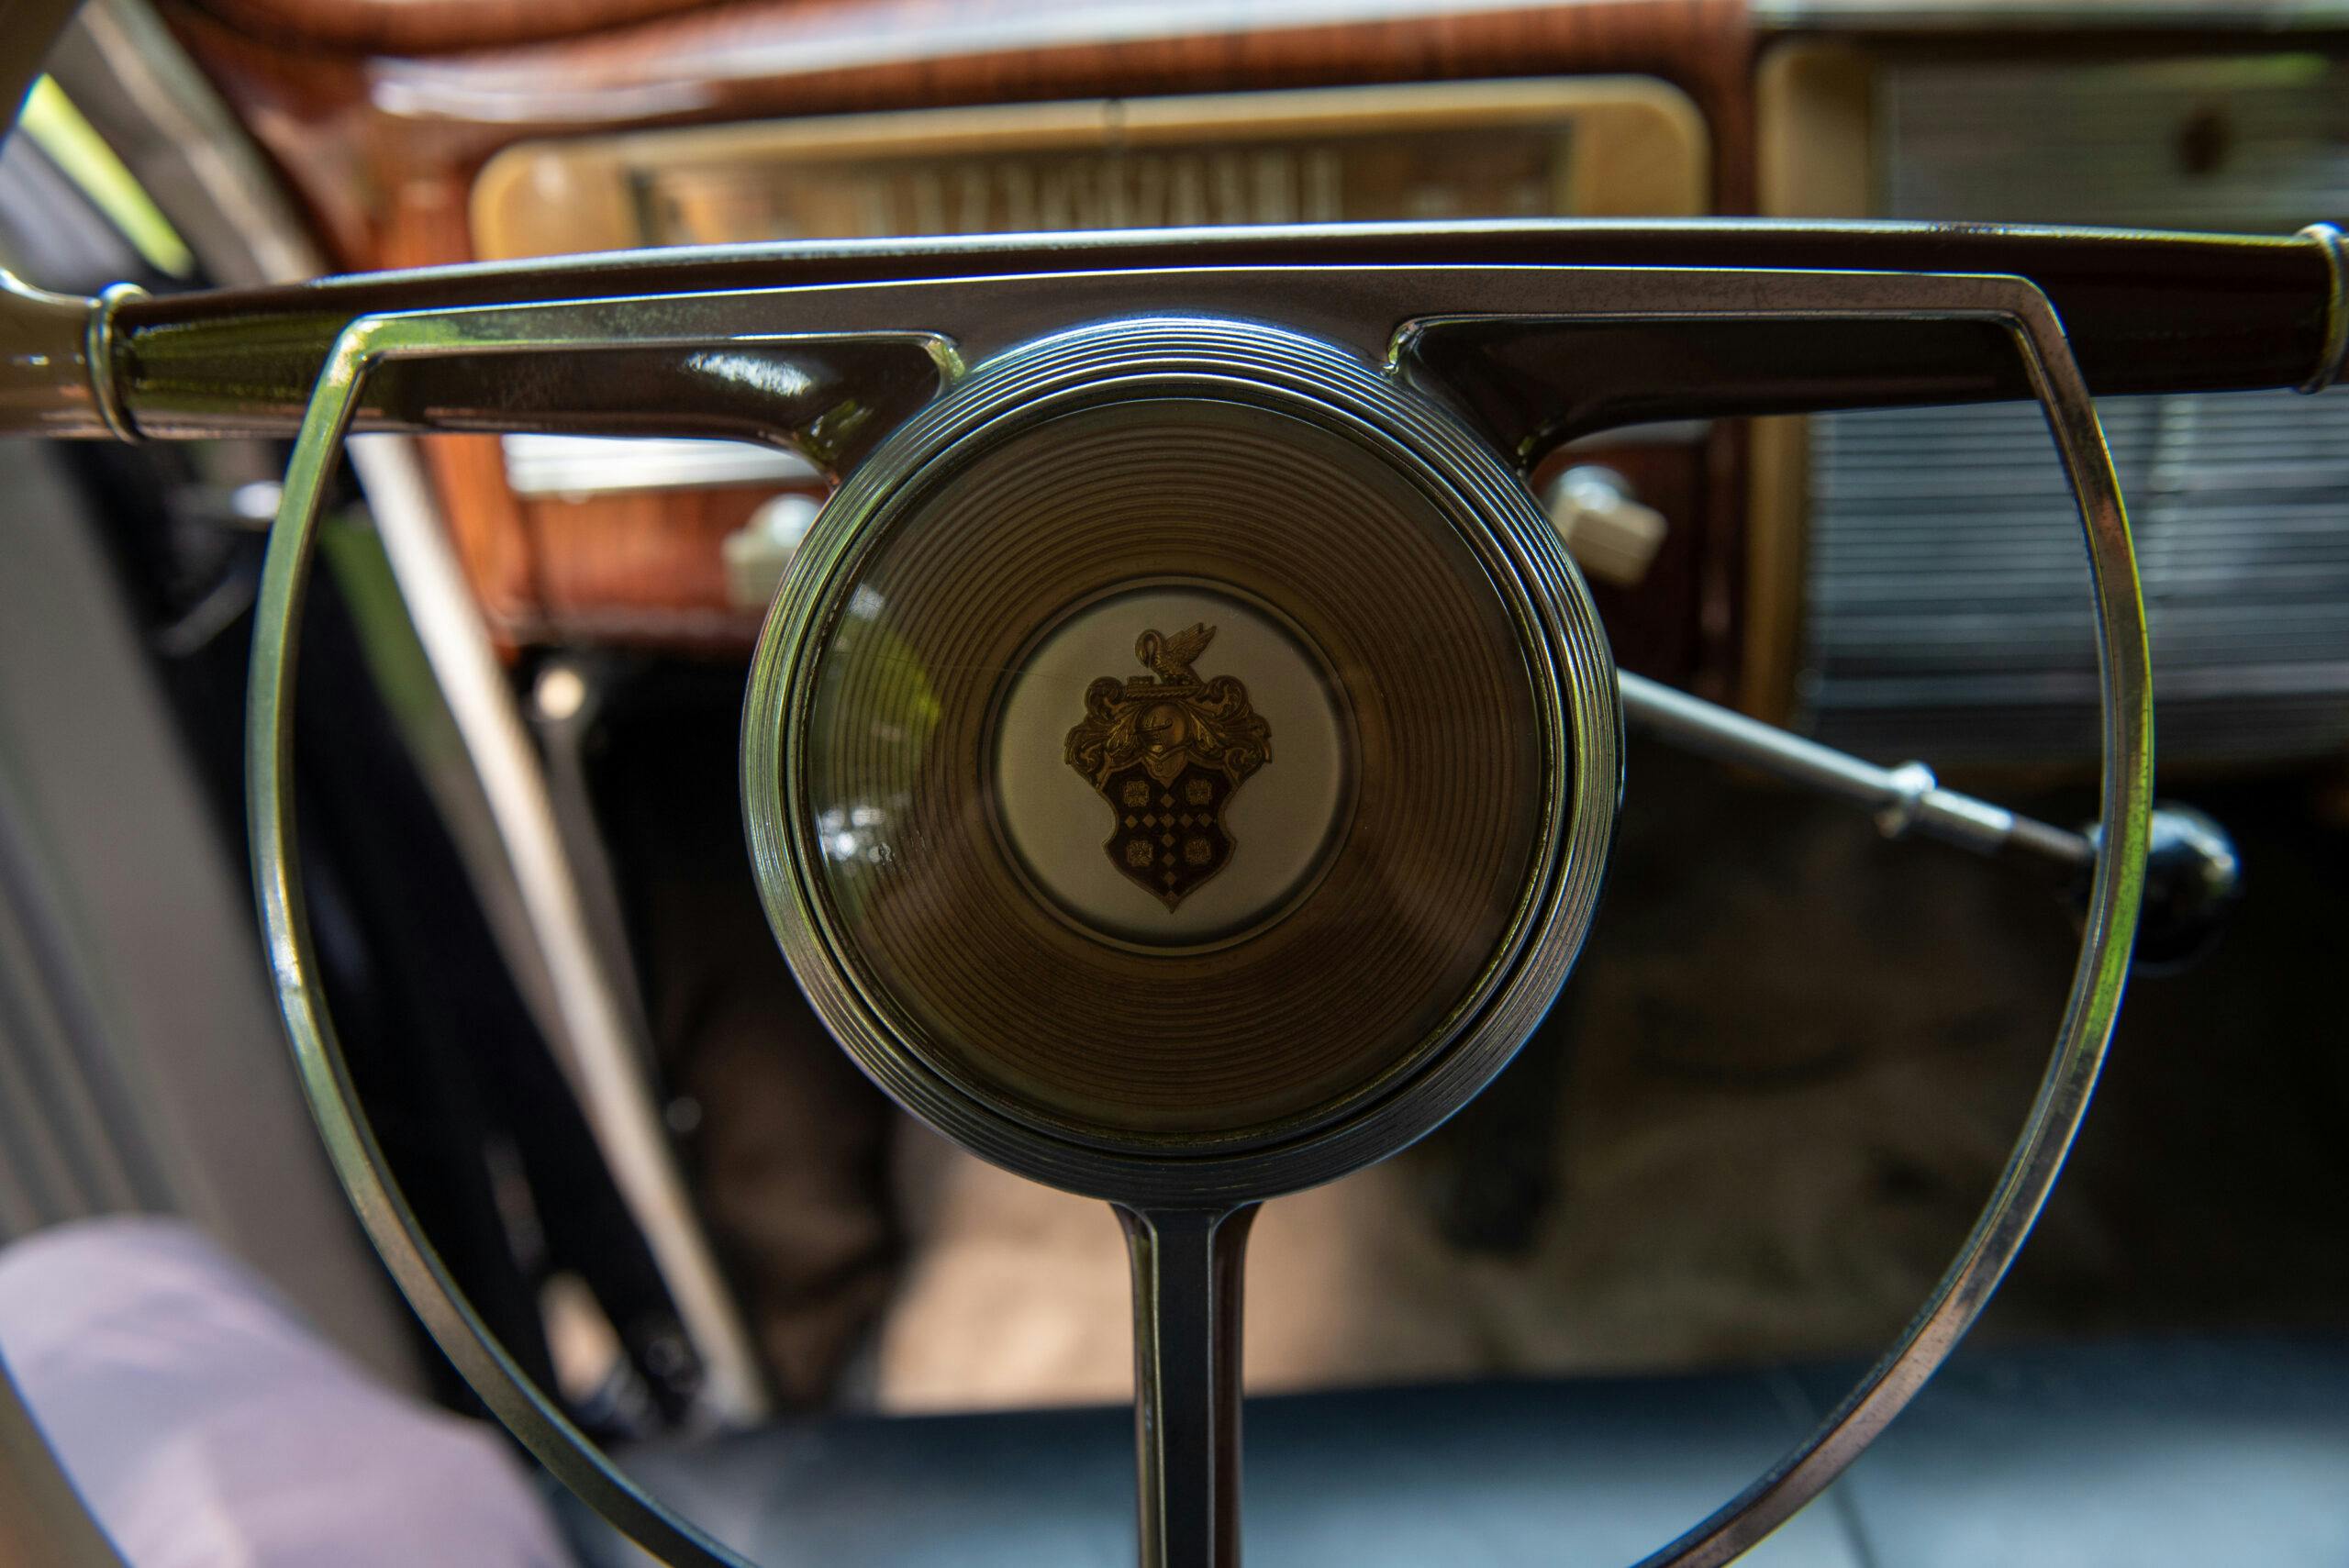 1941 Packard Super Eight One-Eighty Limo steering wheel detail